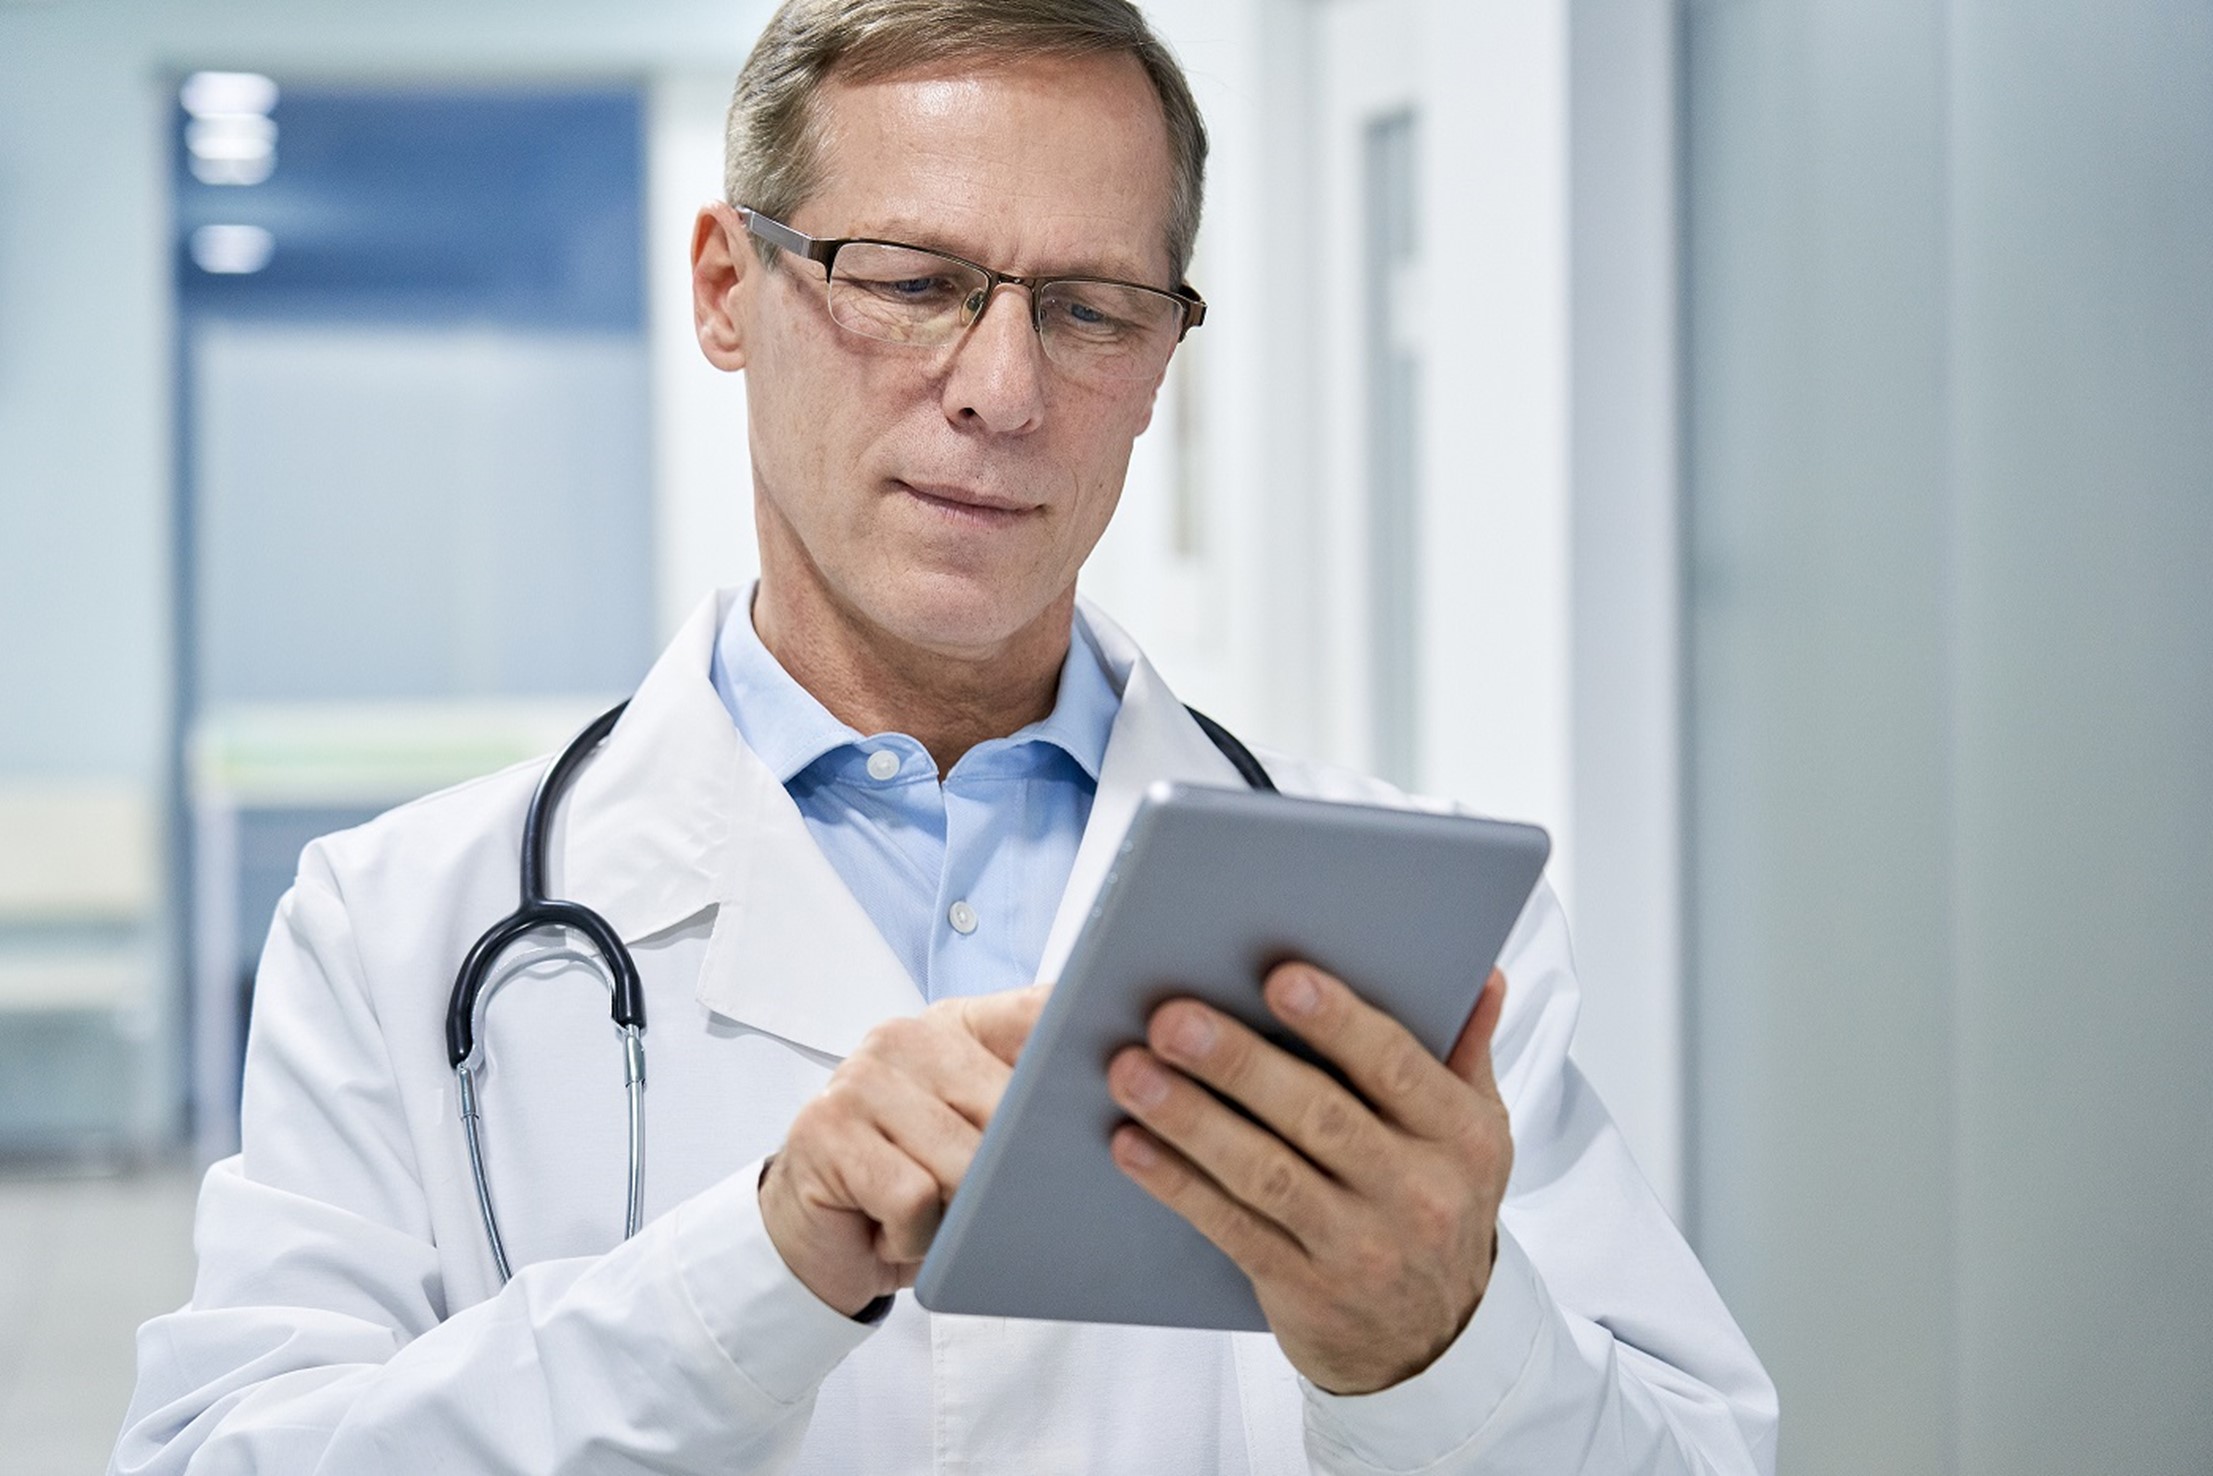 male doctor holding a digital tablet and using industry-specific software technology for medical healthcare